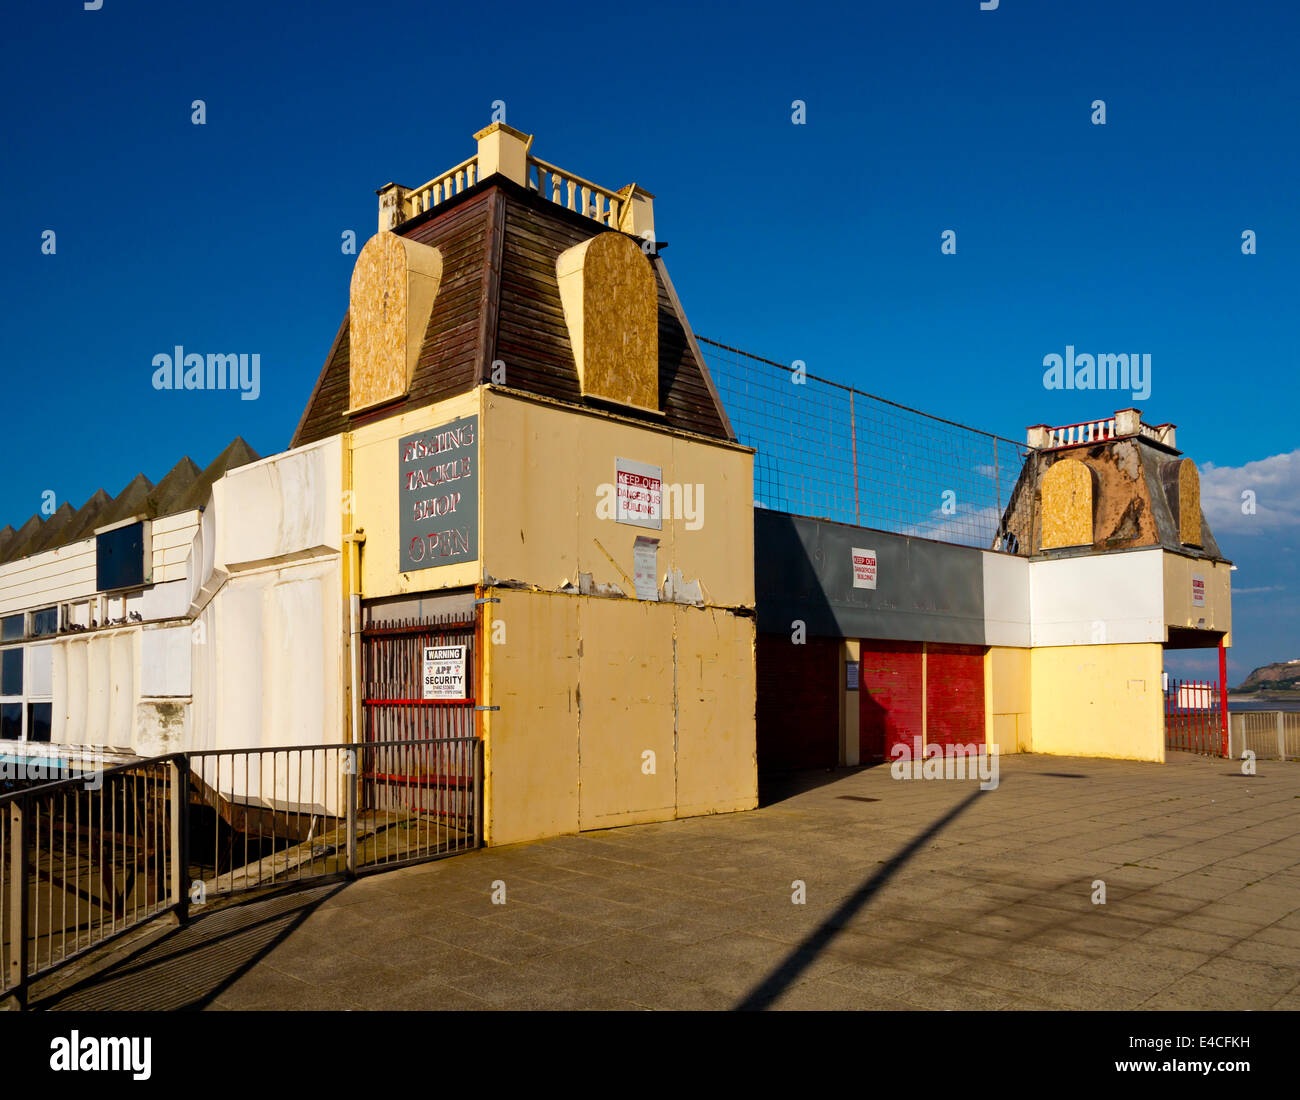 Victoria Pier in Colwyn Bay North Wales UK which opened 1900 but has been unused for many years and threatened with demolition Stock Photo